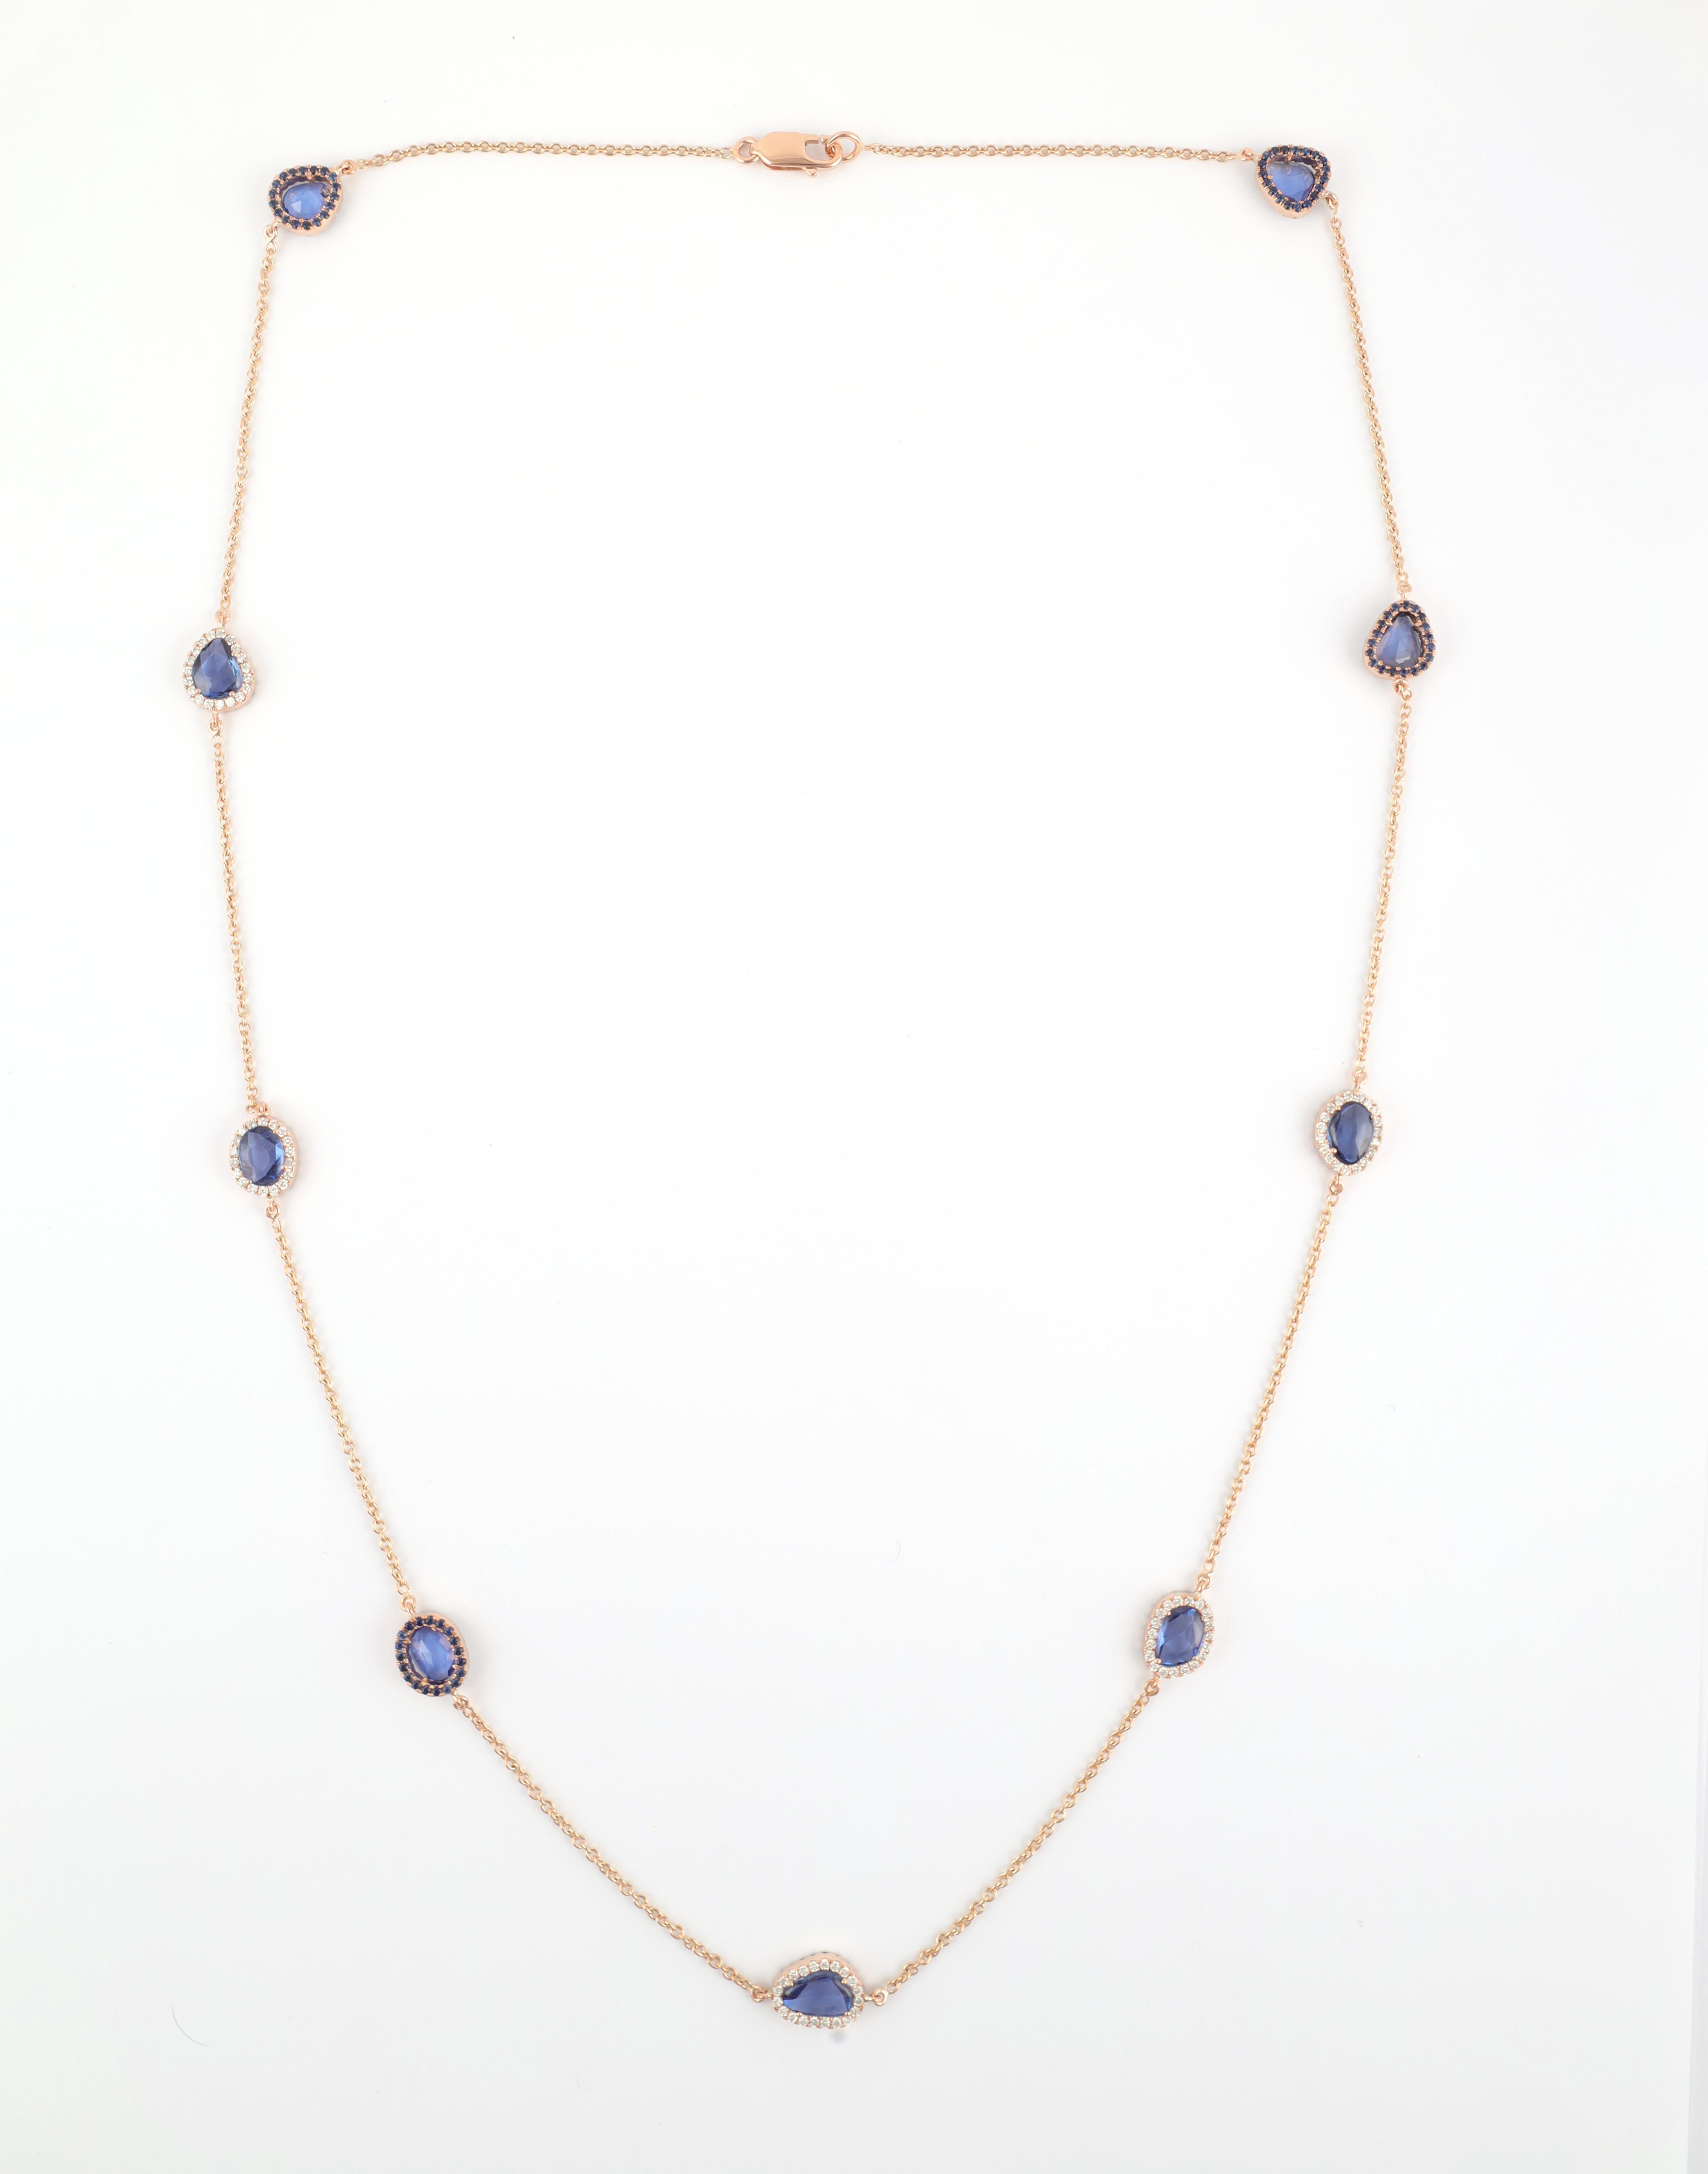 Mixed Cut 7.83 Carats Blue Sapphire & 1.23 Carats Diamond Chain Necklace in 18k Rose Gold  For Sale